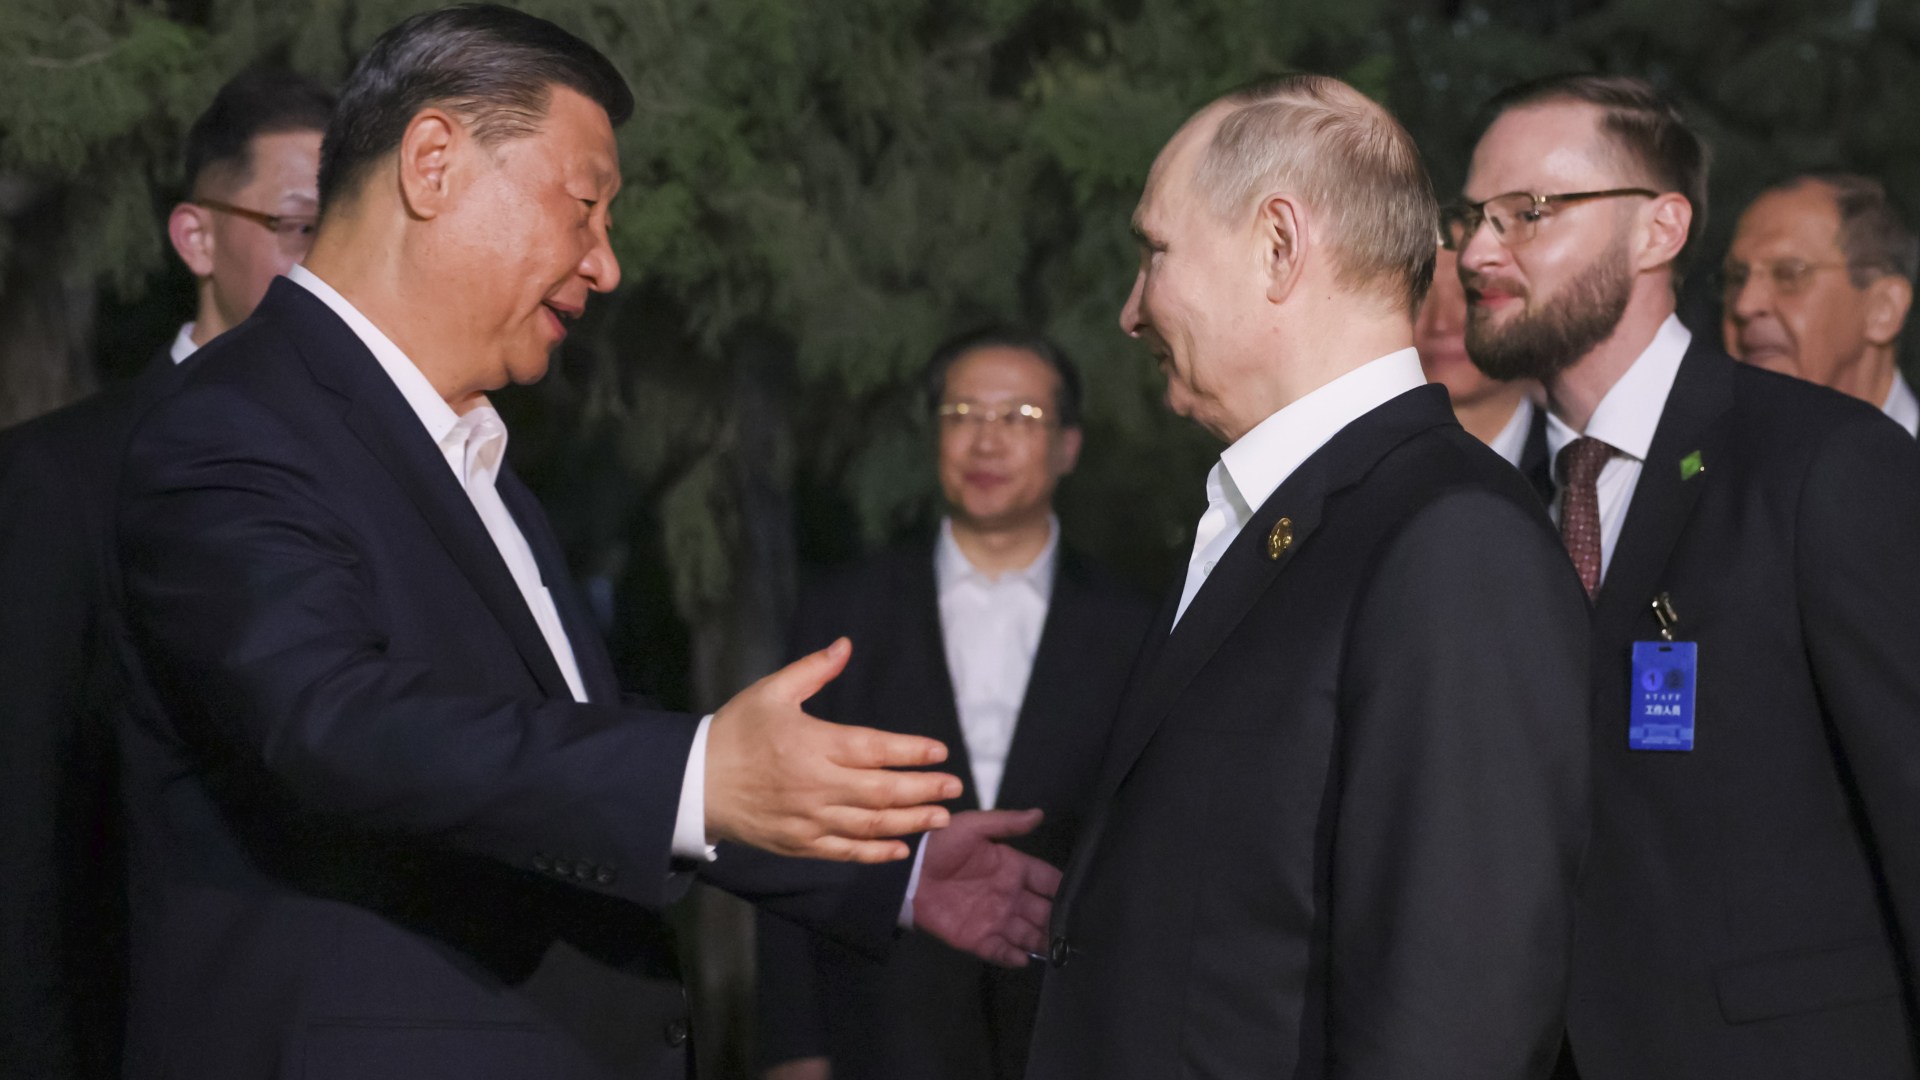 Bizarre moment Xi and Putin go in for TWO HUGS in unprecedented touchy-feely embrace during despots love-in talks [Video]